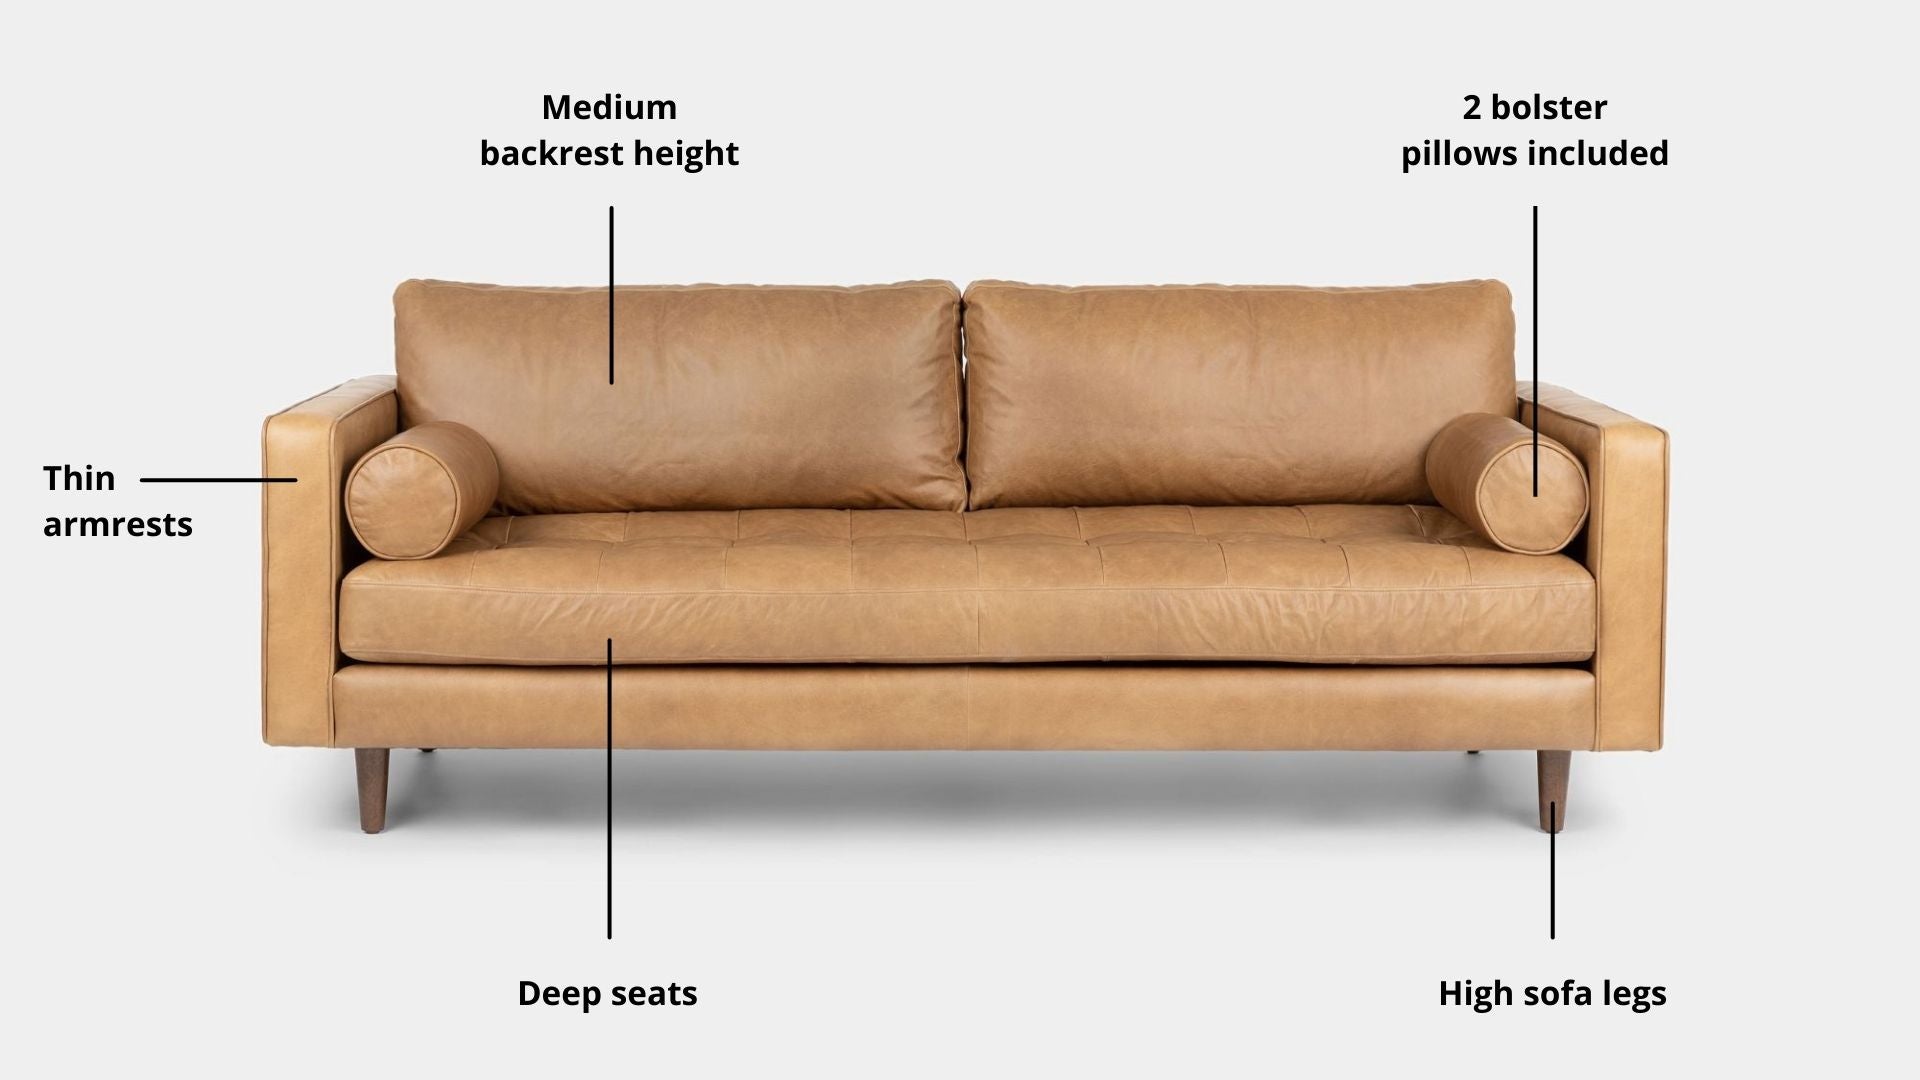 Key features such as armrest thickness, cushion height, seat depth and sofa leg height for Castle Half Leather Sofa